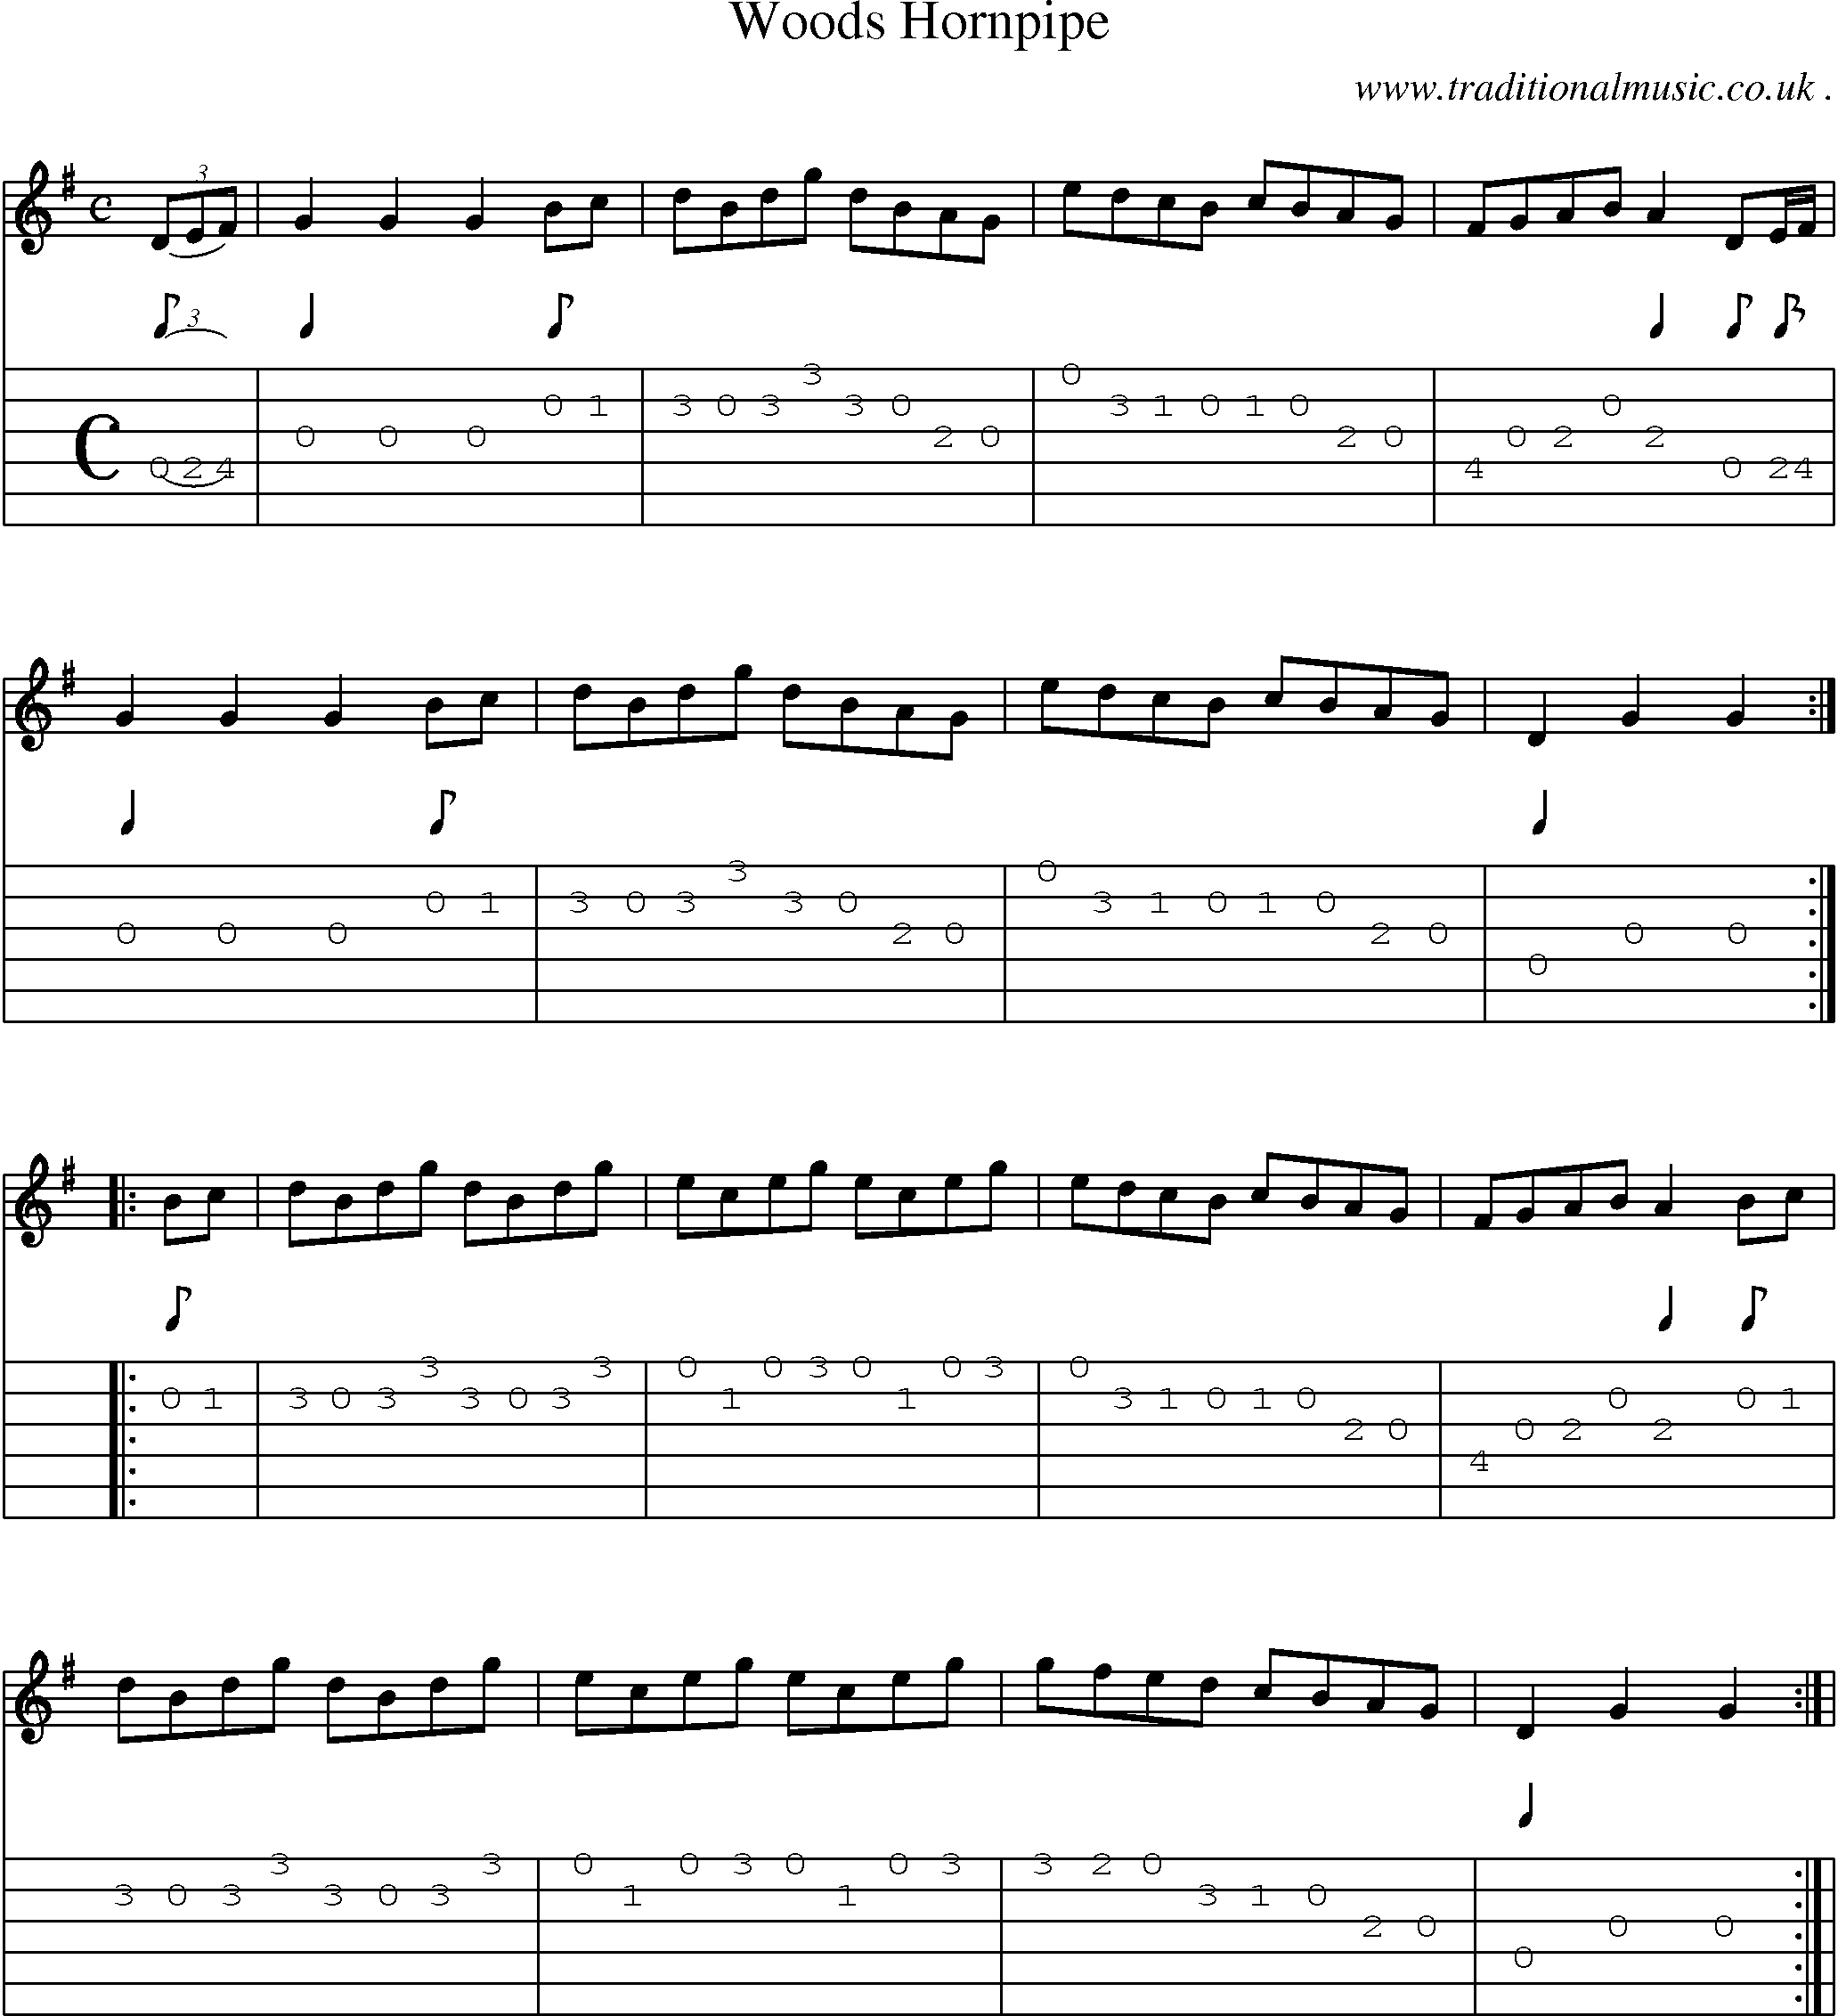 Sheet-Music and Guitar Tabs for Woods Hornpipe